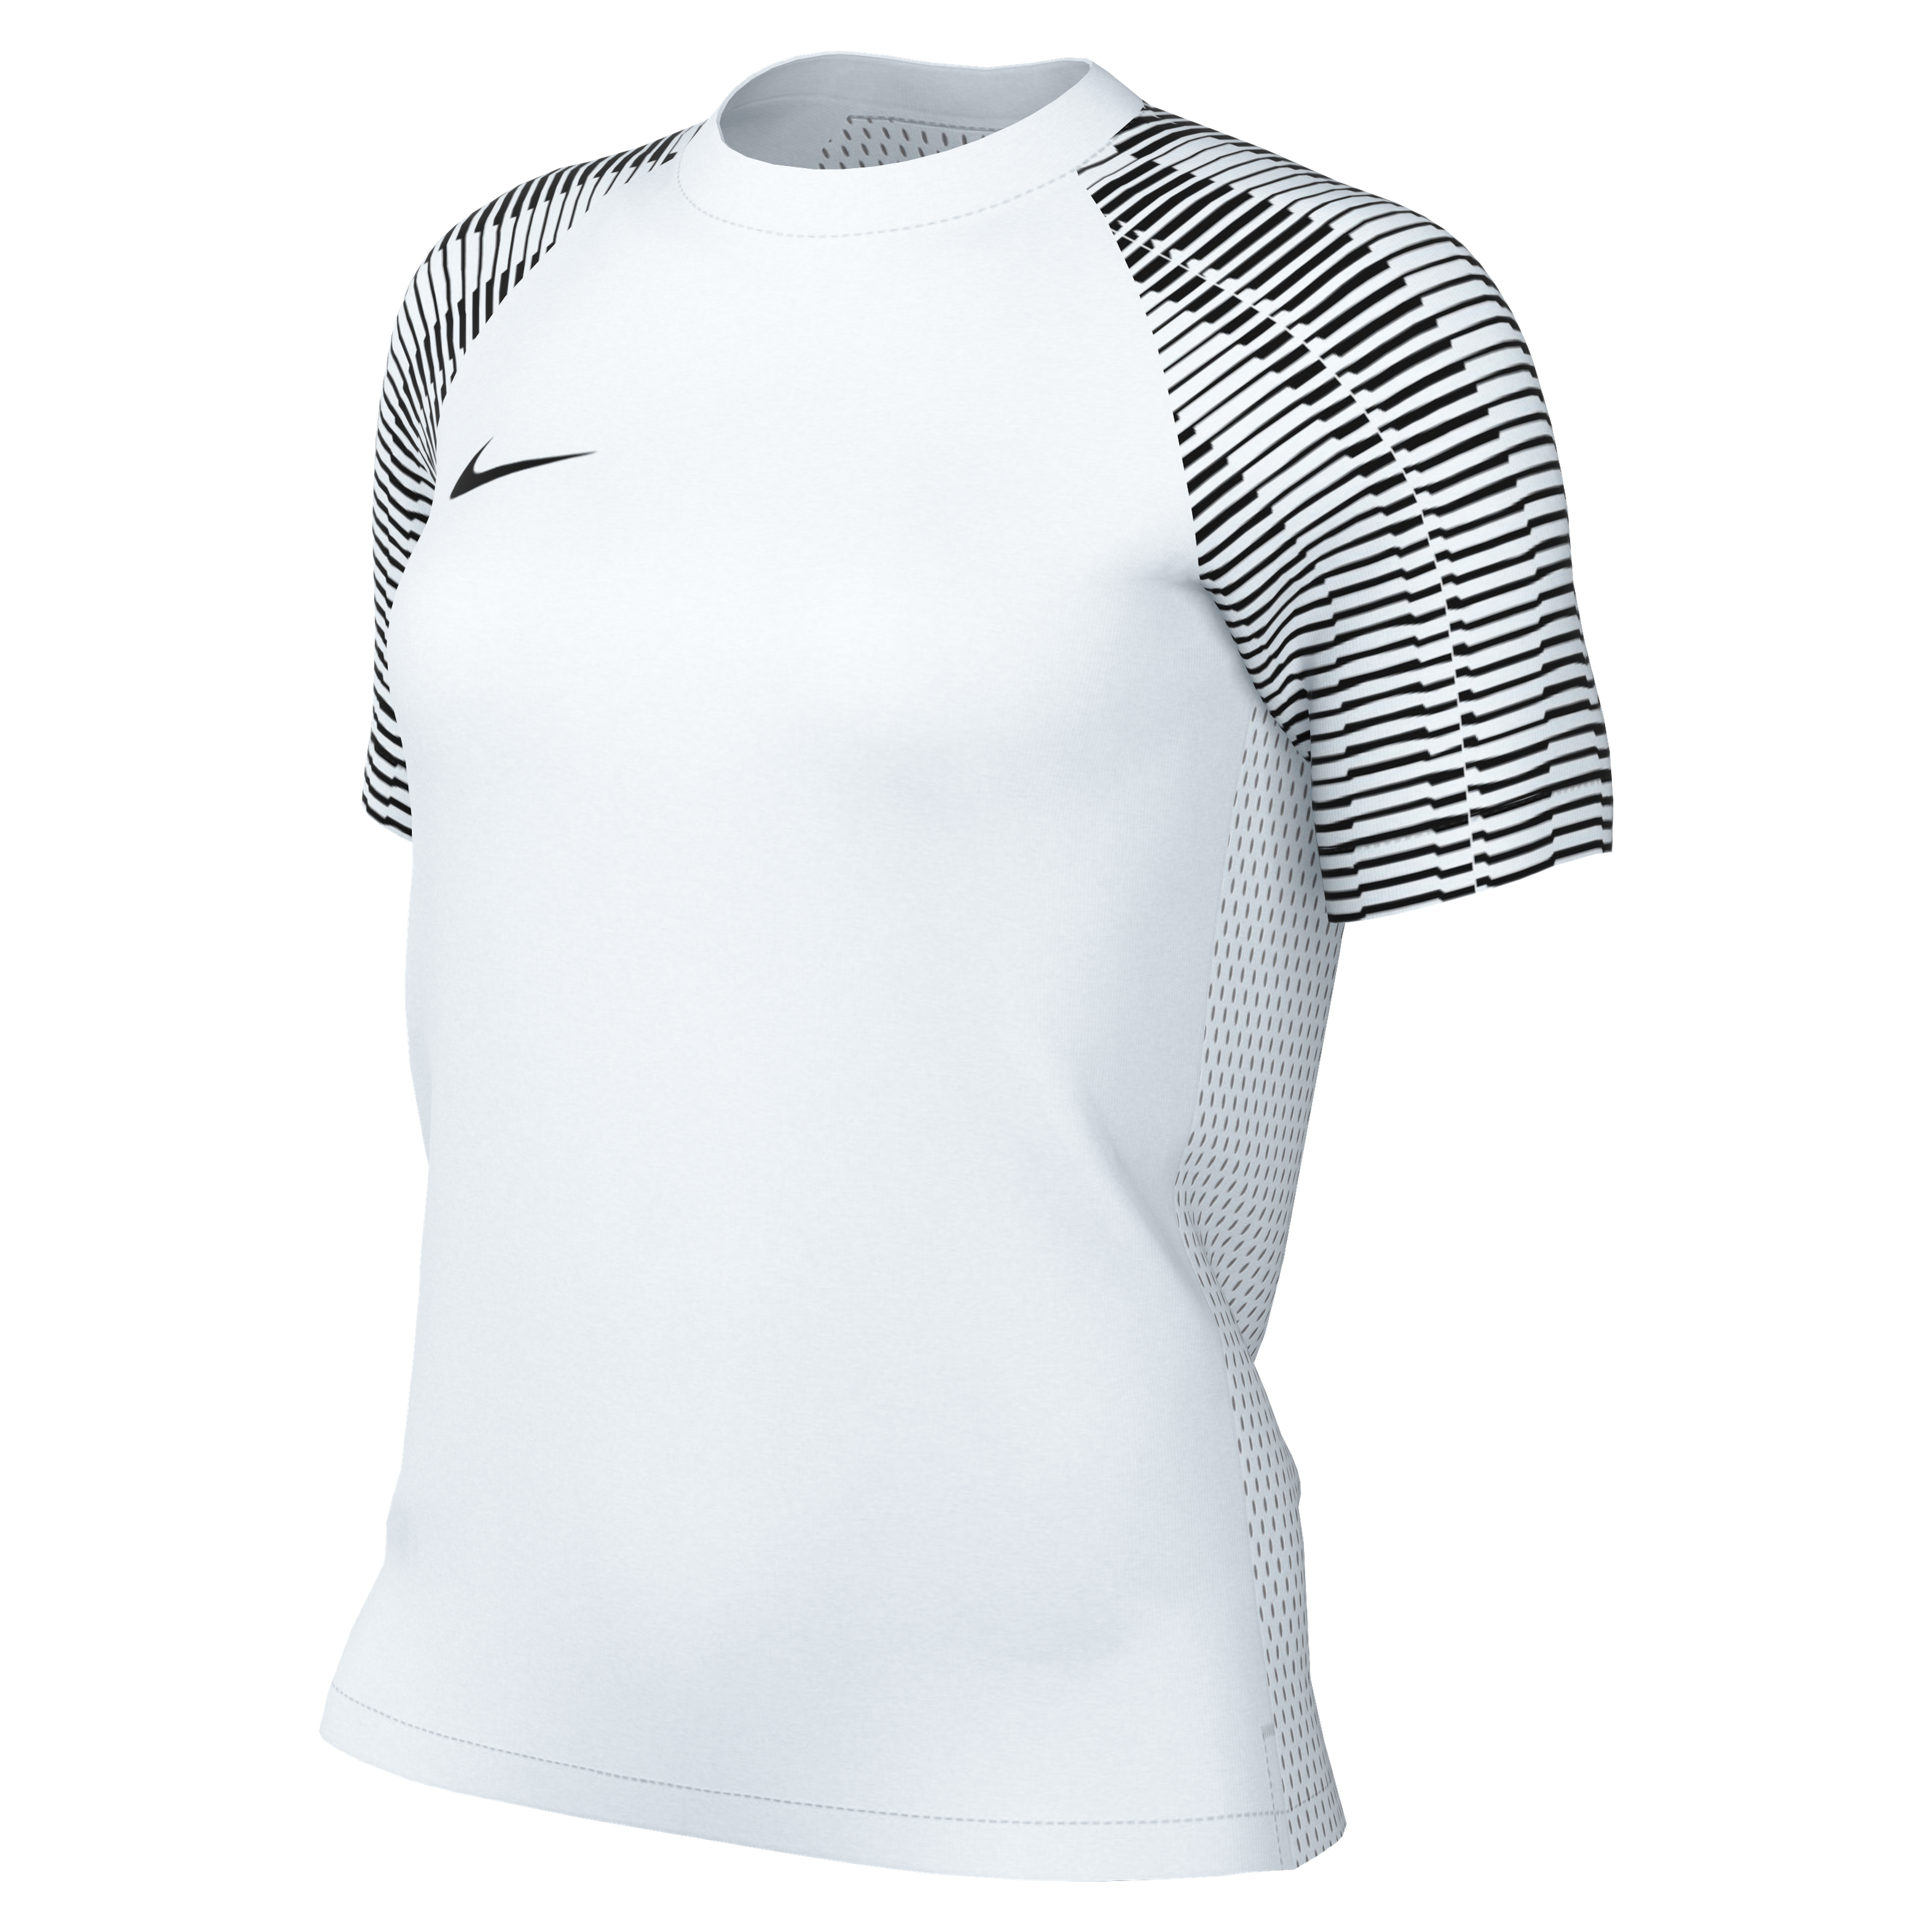 Clifton All Whites - Women's Academy Jersey Short Sleeve